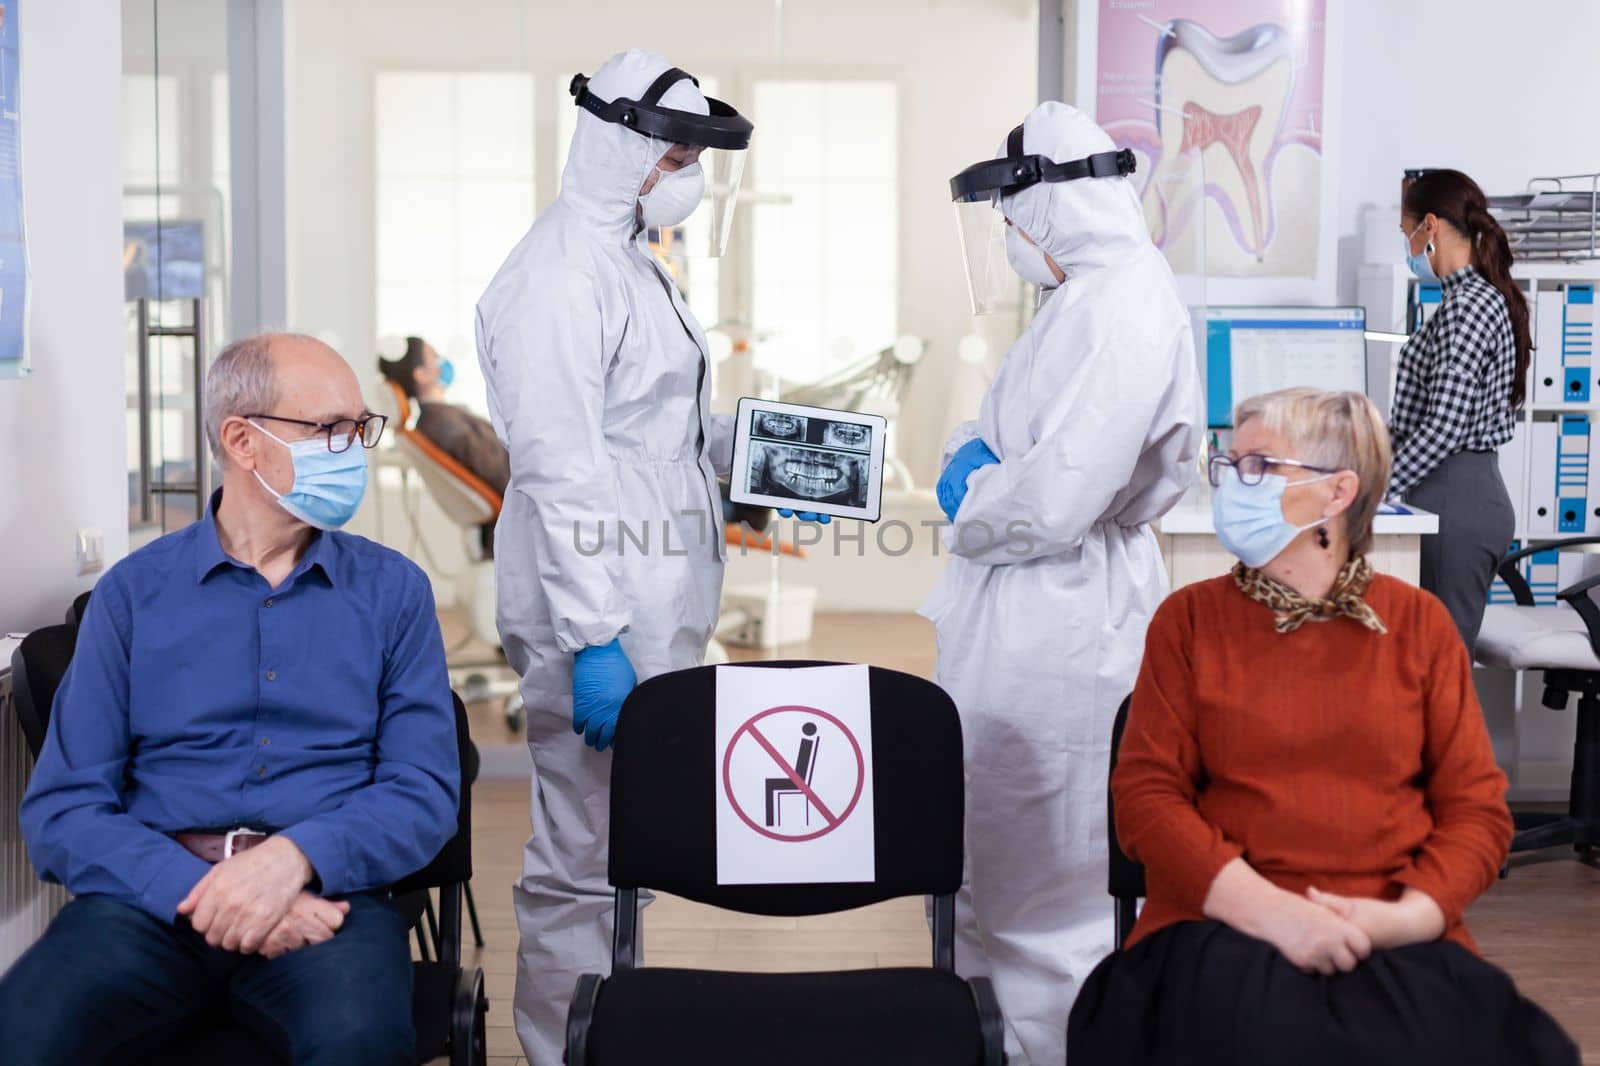 Man discussing with nurse in dental reception wearing protection suit against coronavirus, elderly patients waiting in reception keeping distance. Concept of new normal dentist visit in outbreak.